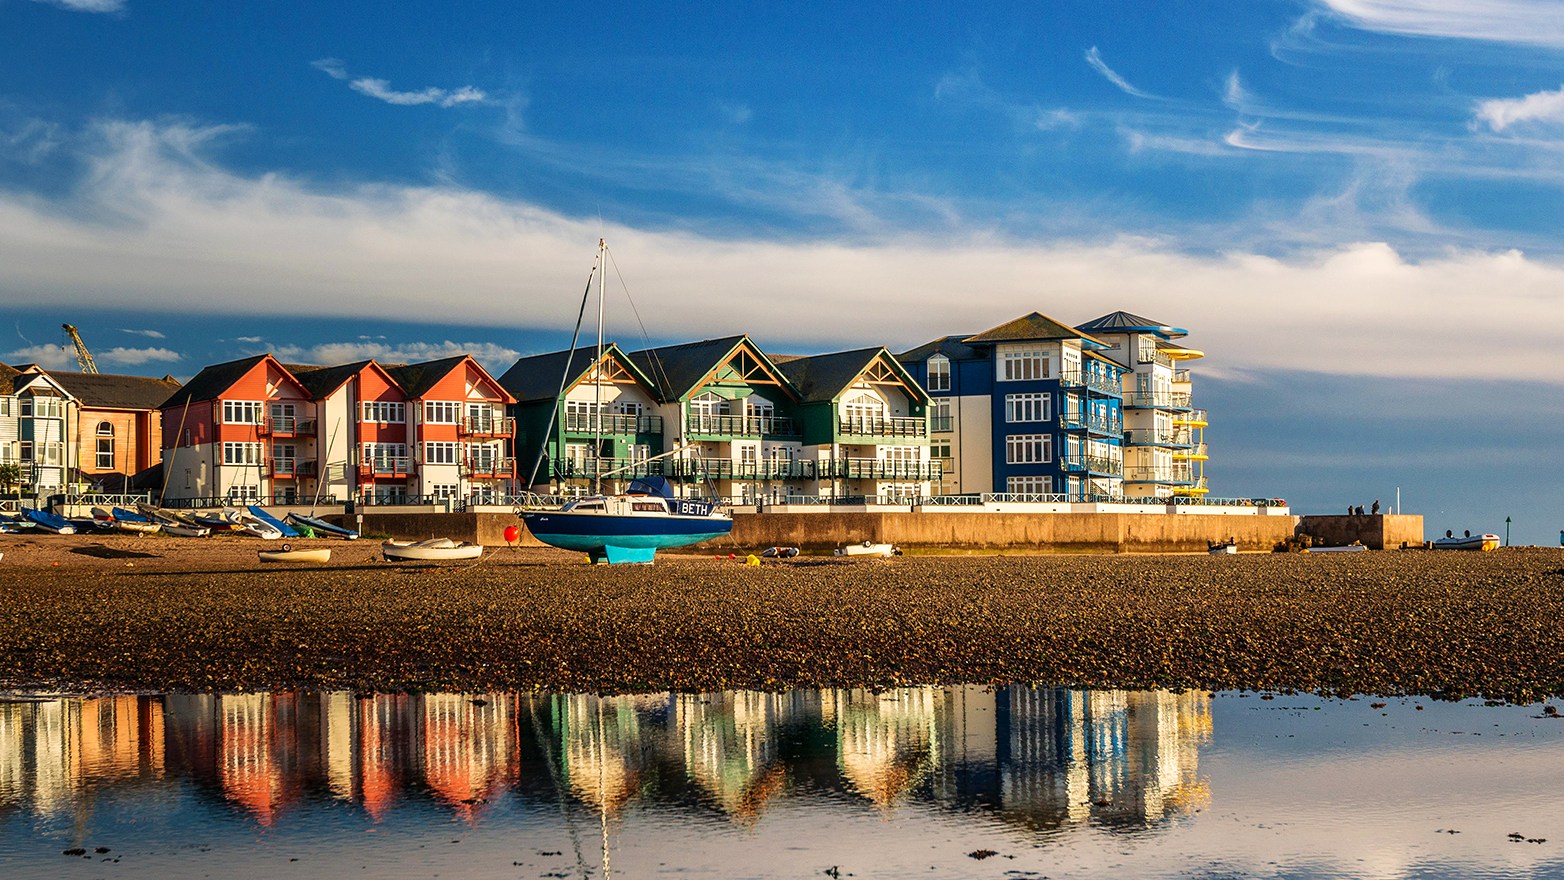 20 of the best seaside towns in the UK